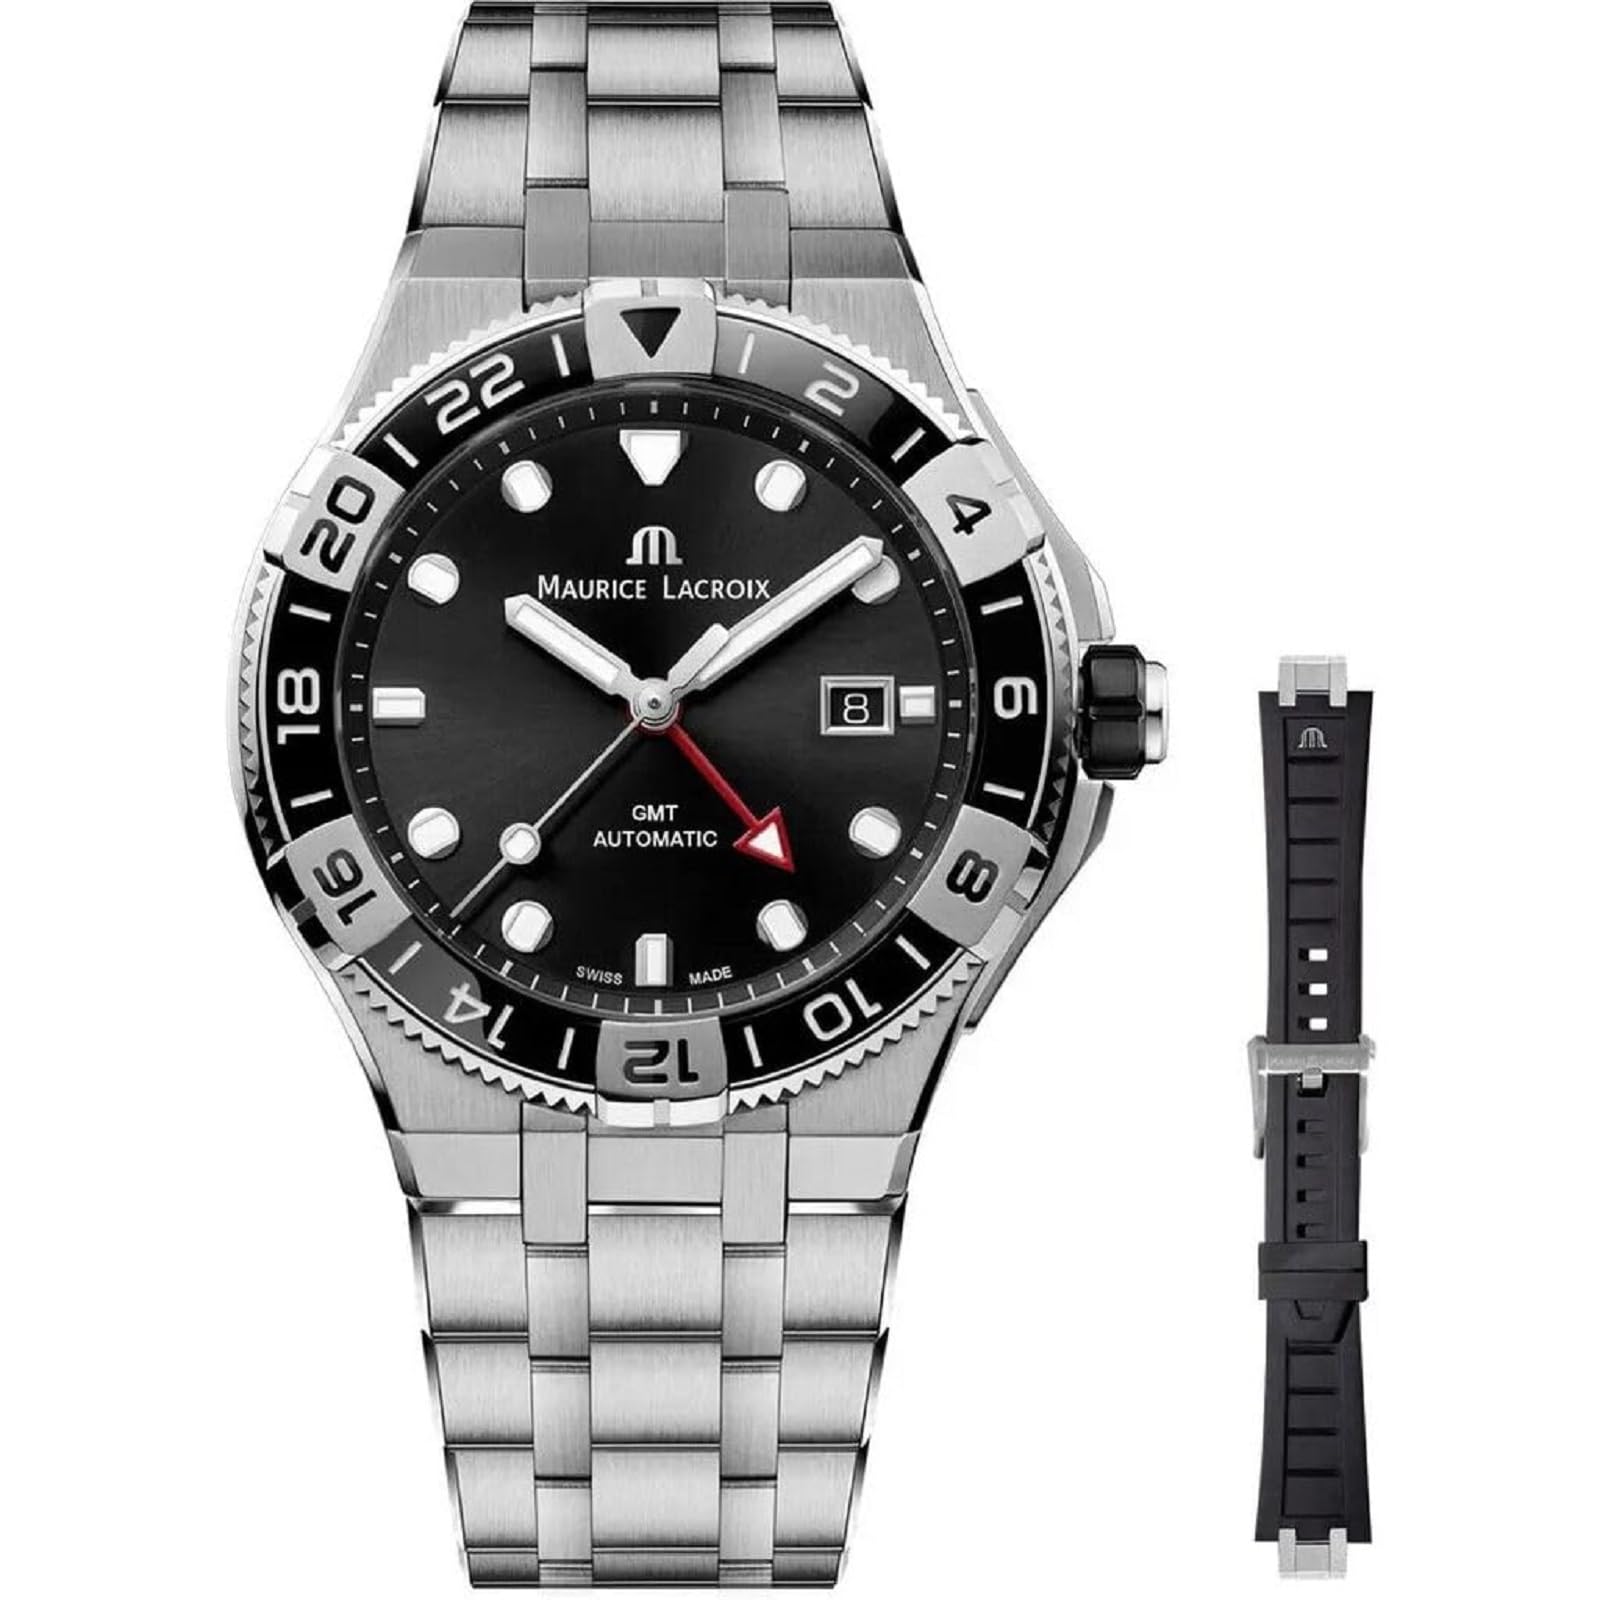 Maurice Lacroix AIKON Automatic Venturer GMT 43mm, Stainless Steel Case with Black Ceramic Bezel, Stainless Steel Strap, 30 ATM Water Resistance